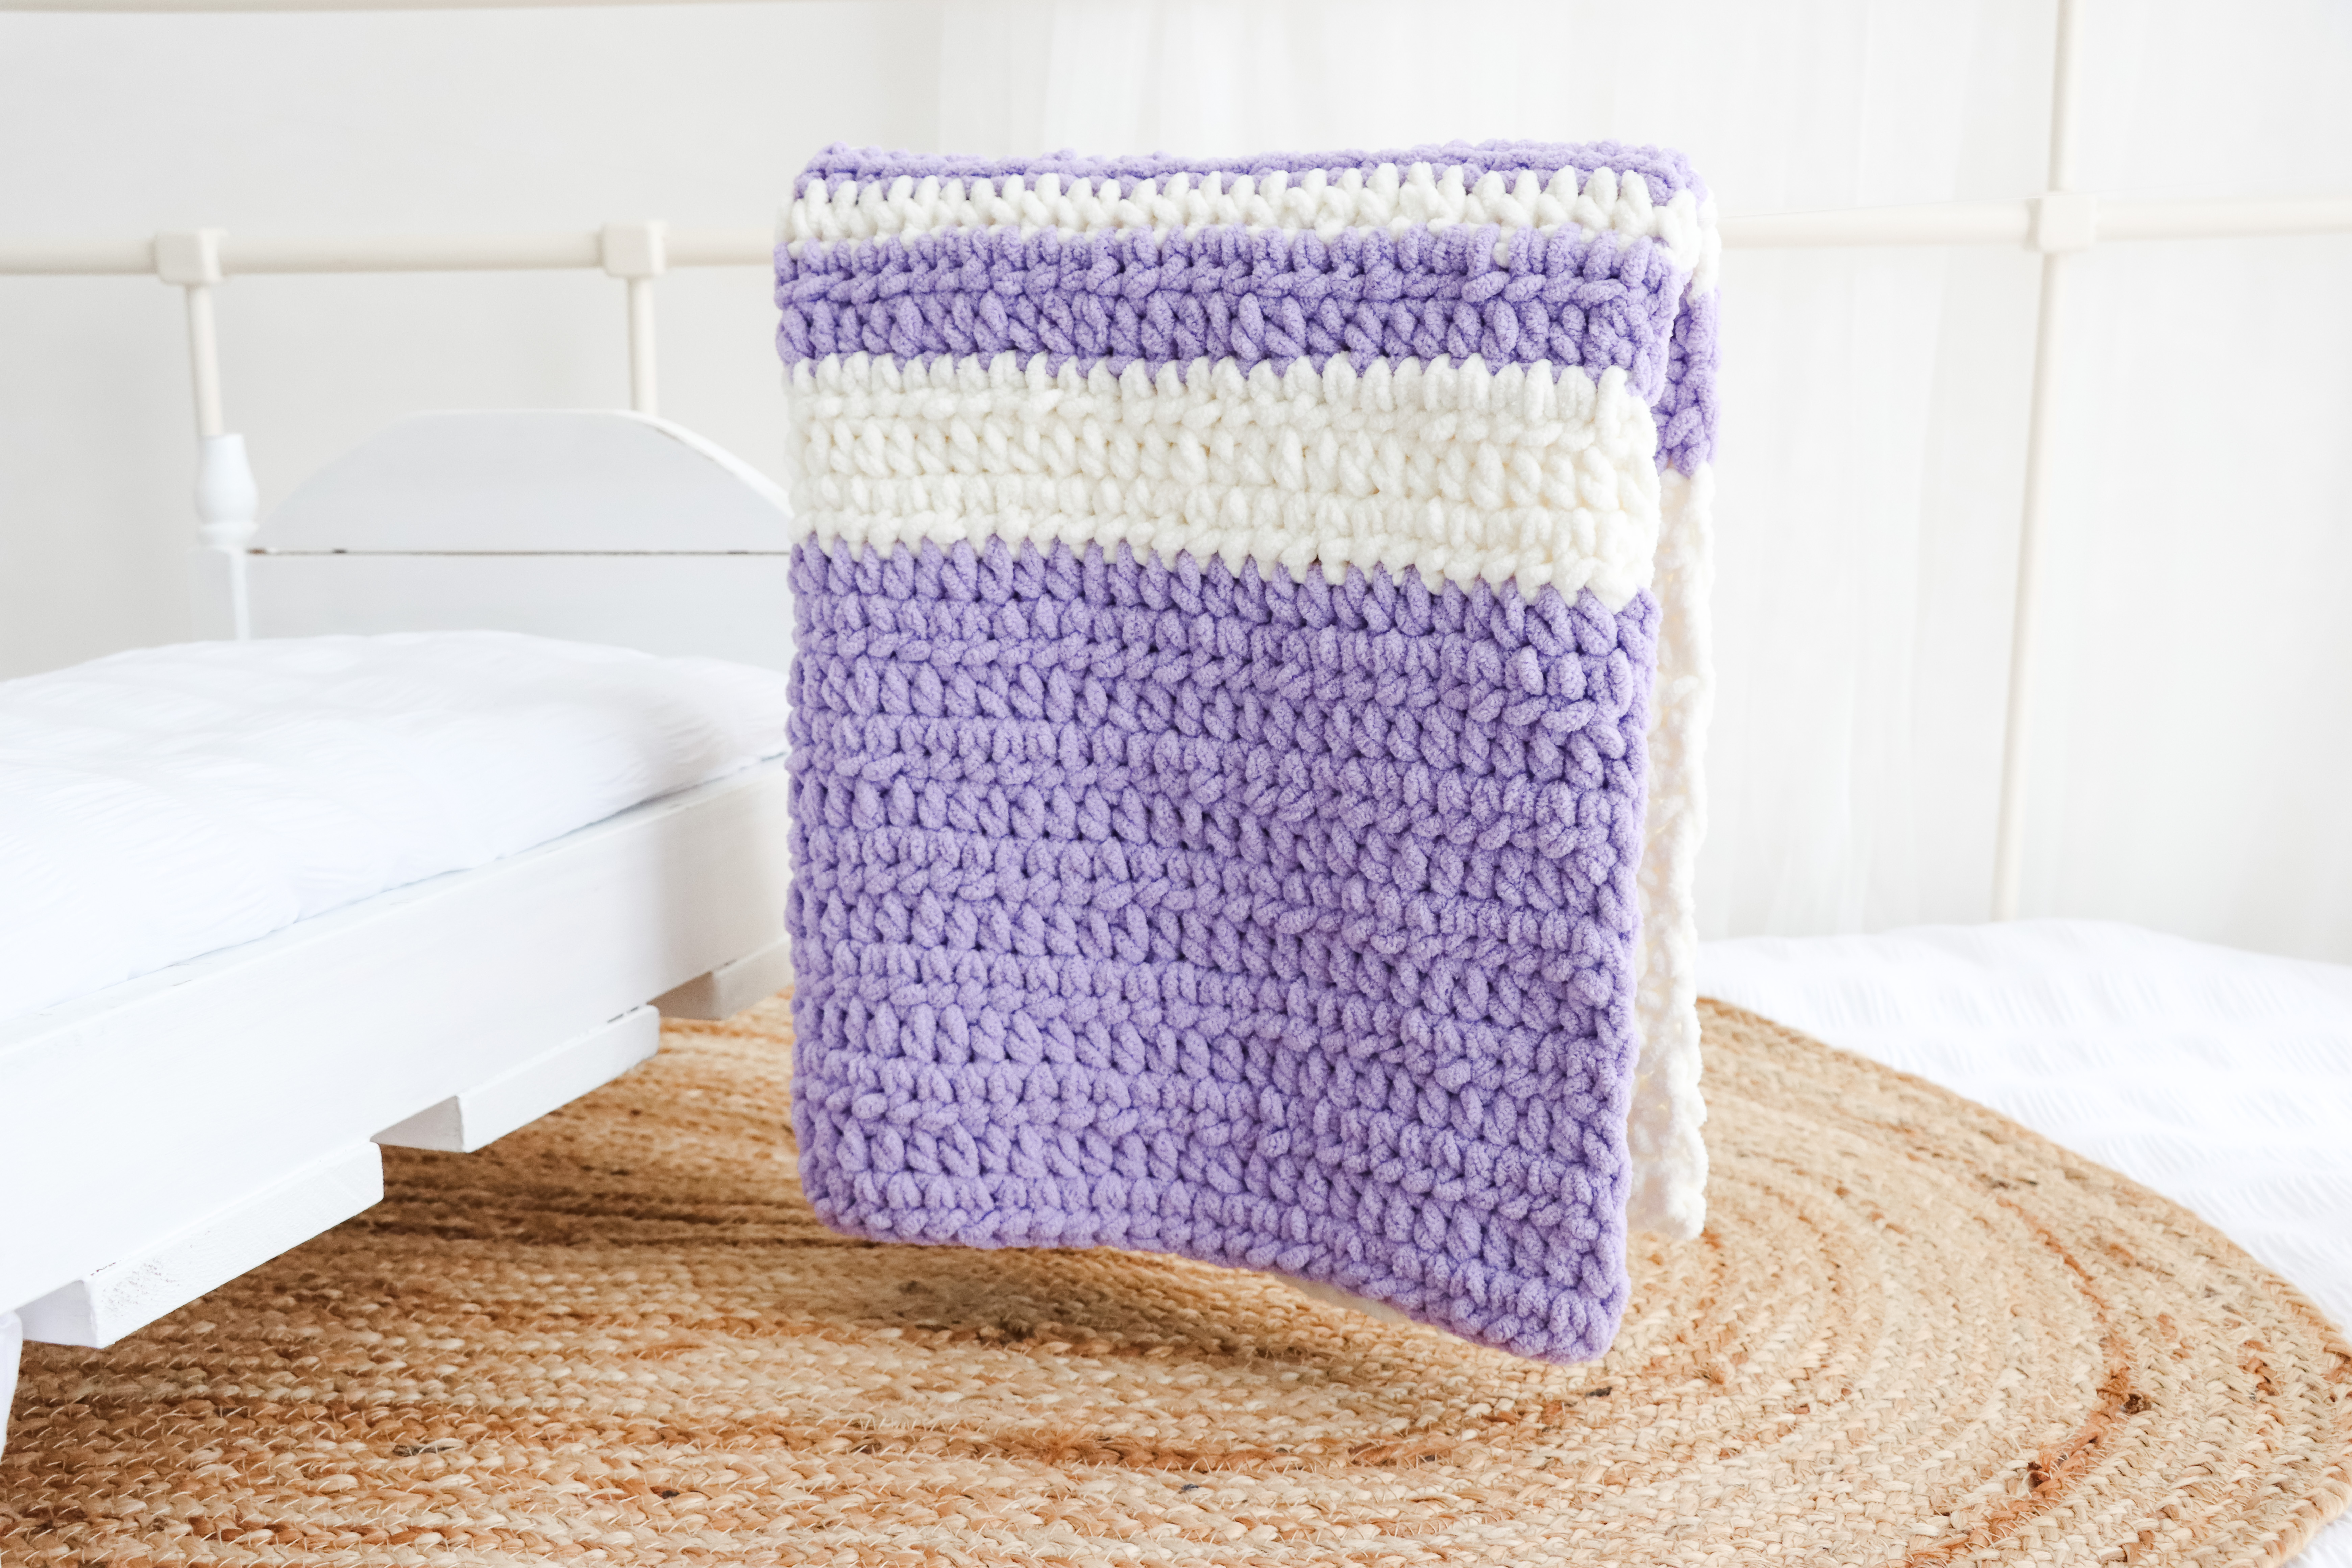 A lilac and white striped blanket is draped over a white bed post.